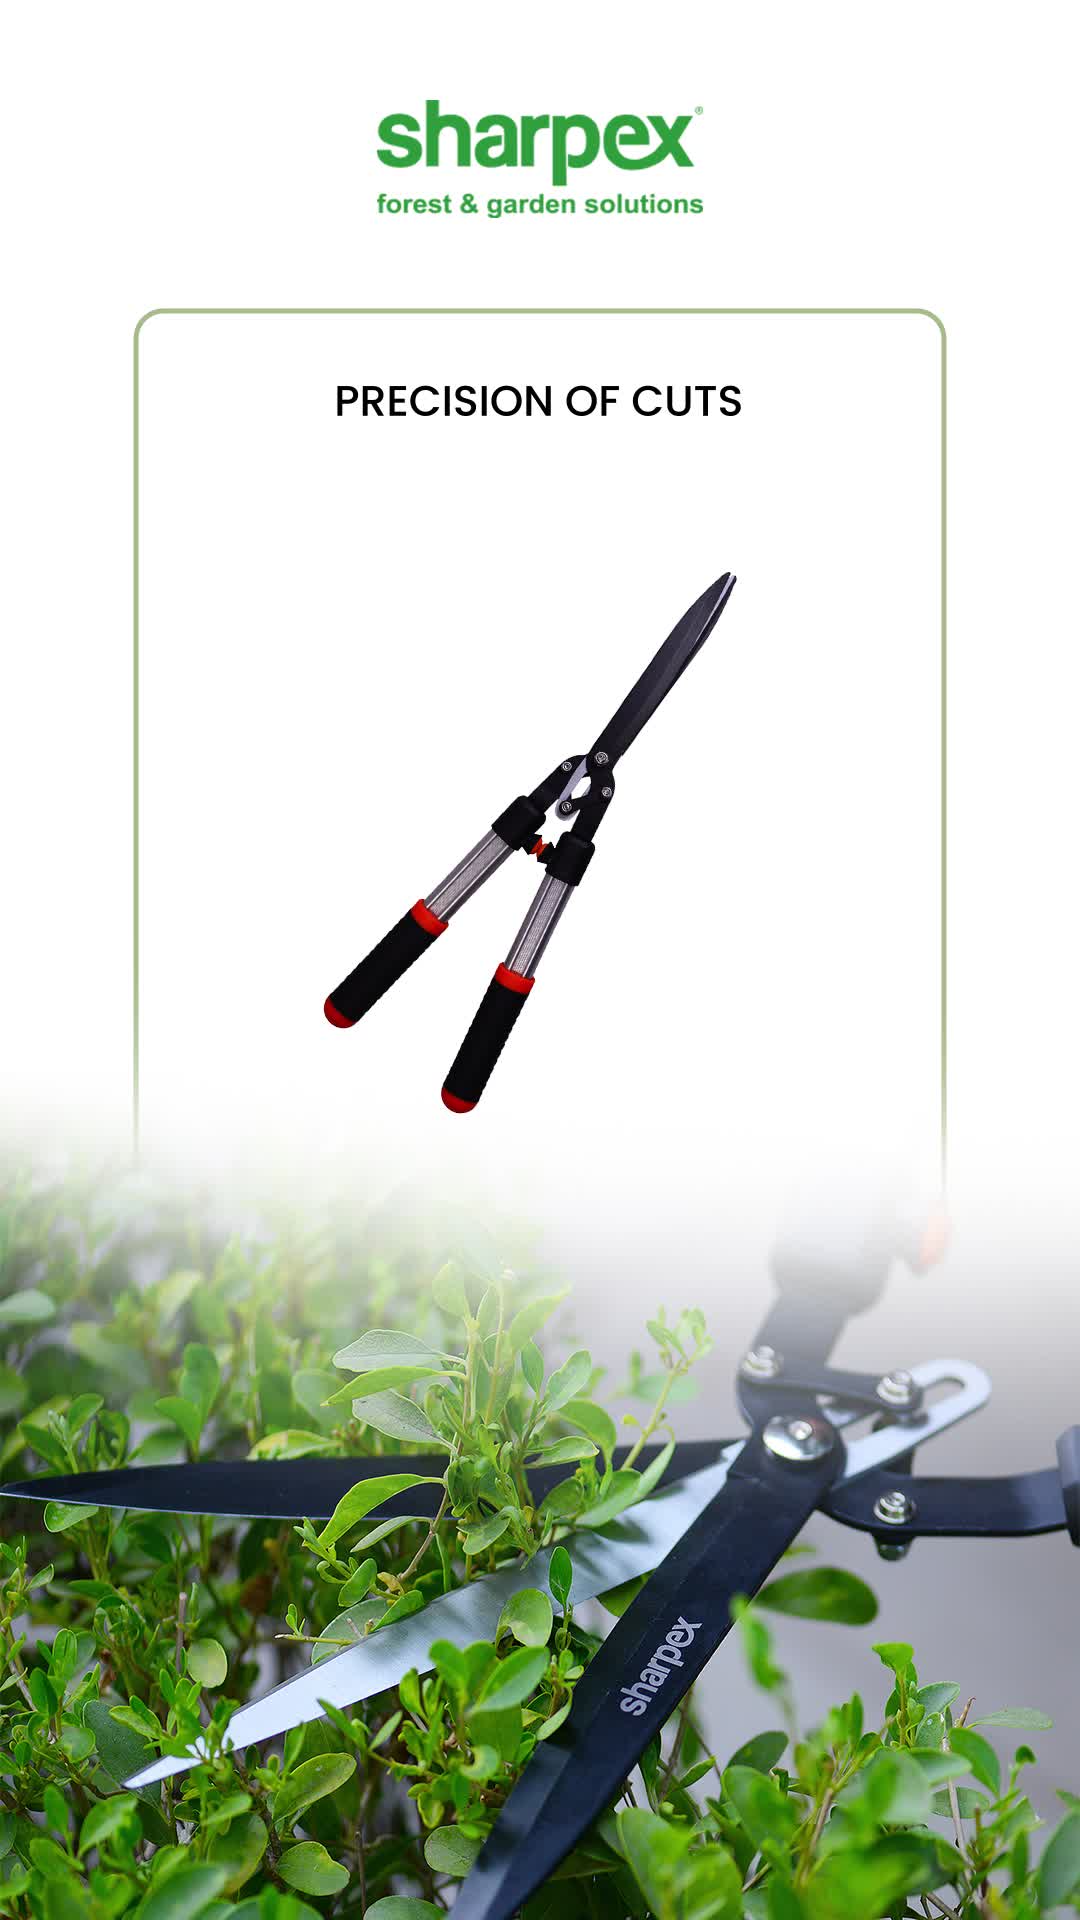 #Sharpex3BladeHedgeShear Is Ideal Tool Used For Trimming, Shaping Shrub, Decorative Plants. 3 Blade Hedge Shear feature precision blades each designed to make trimming shrubs easier. Get a clean and easy cut on everything from your tiniest twigs to your brute branches.

#GardeningAccessories #GardeningTools #ModernGardeningTools #GardeningProducts #GardenProducts #Sharpex #SharpexIndia #SharpexSecateurs